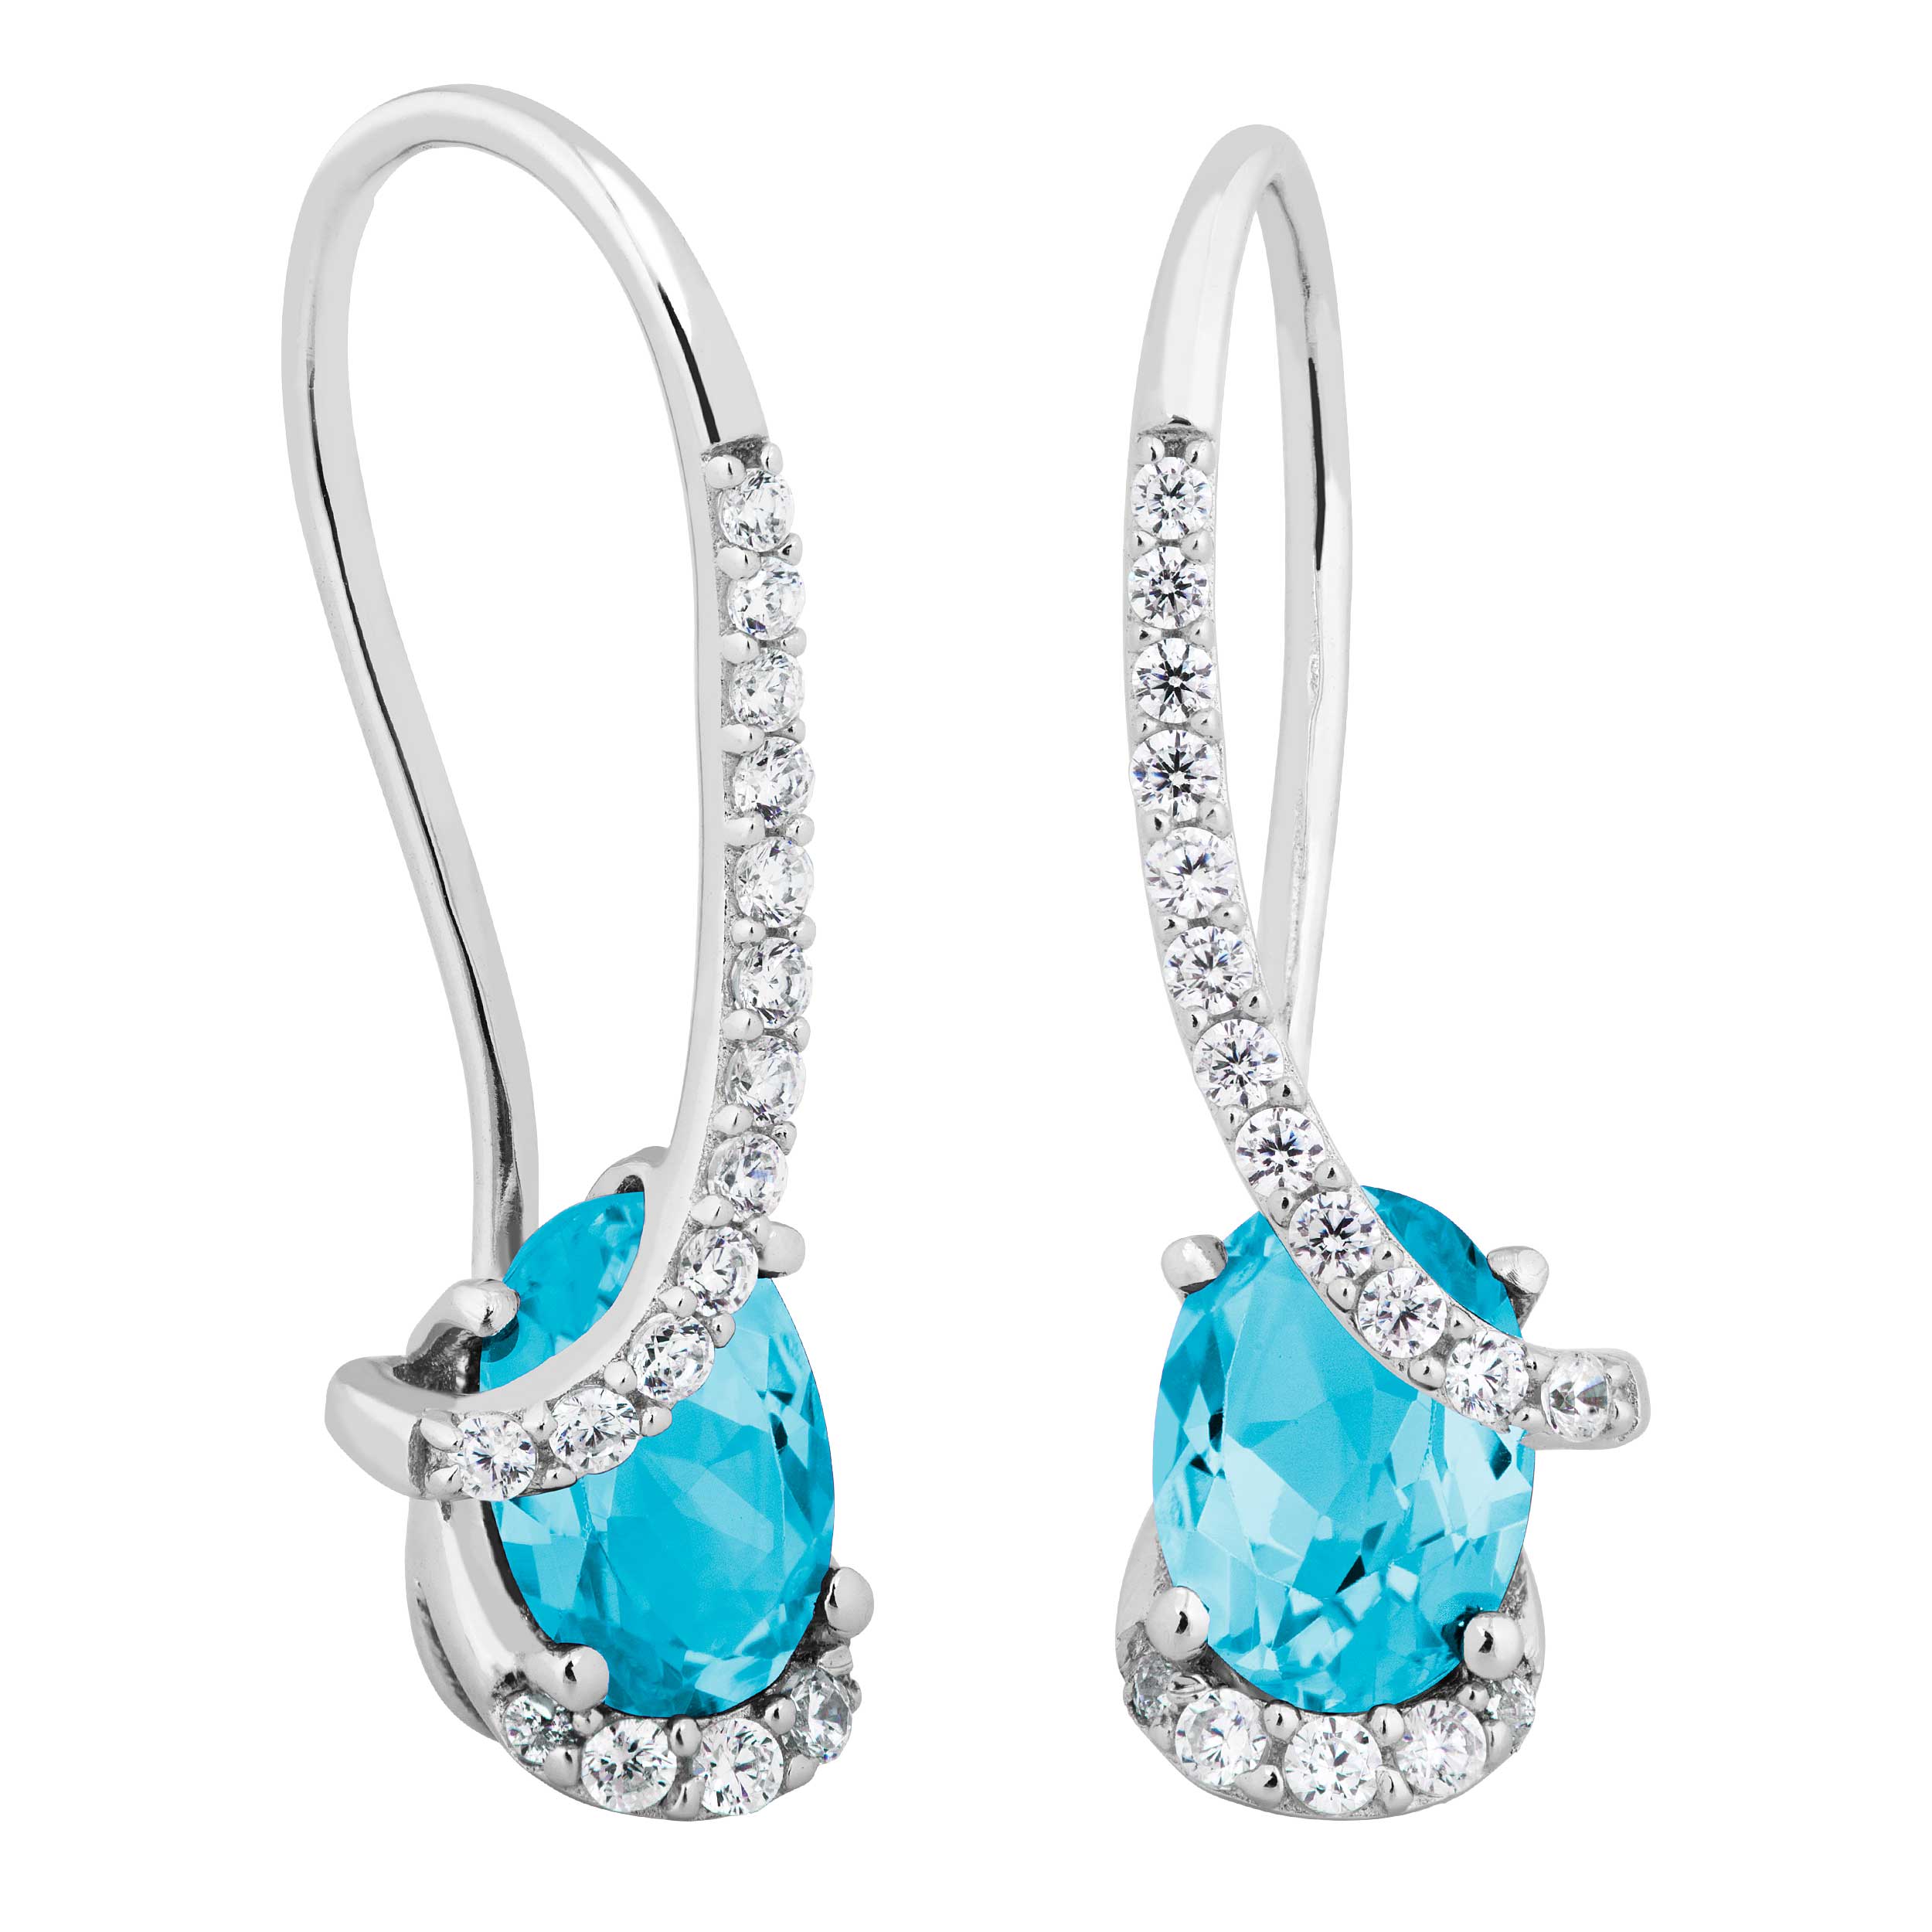 Oval Swiss Blue Topaz and White Topaz Earrings, Rhodium Plated Sterling Silver